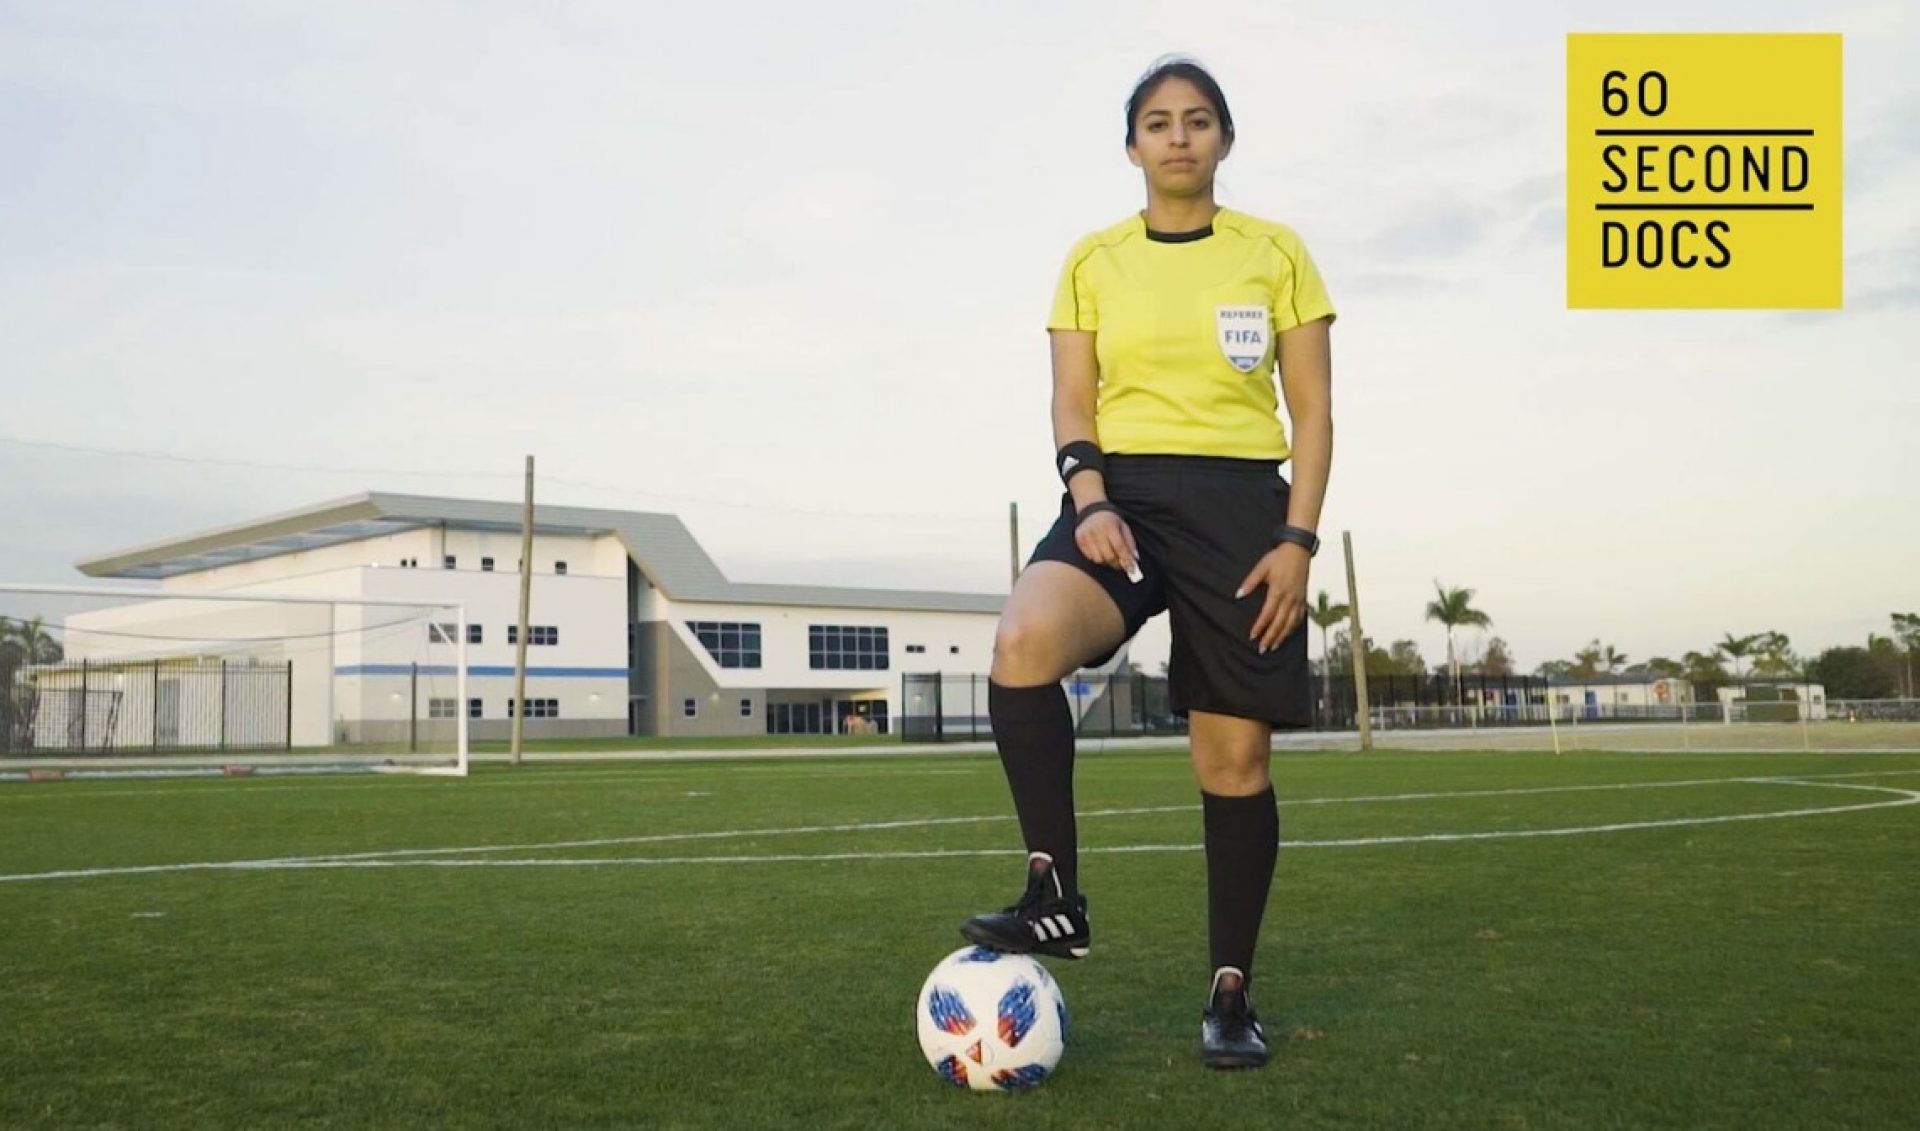 Women Who Are ‘Playing For Change’ In World Of Soccer Take Center Stage In New Series